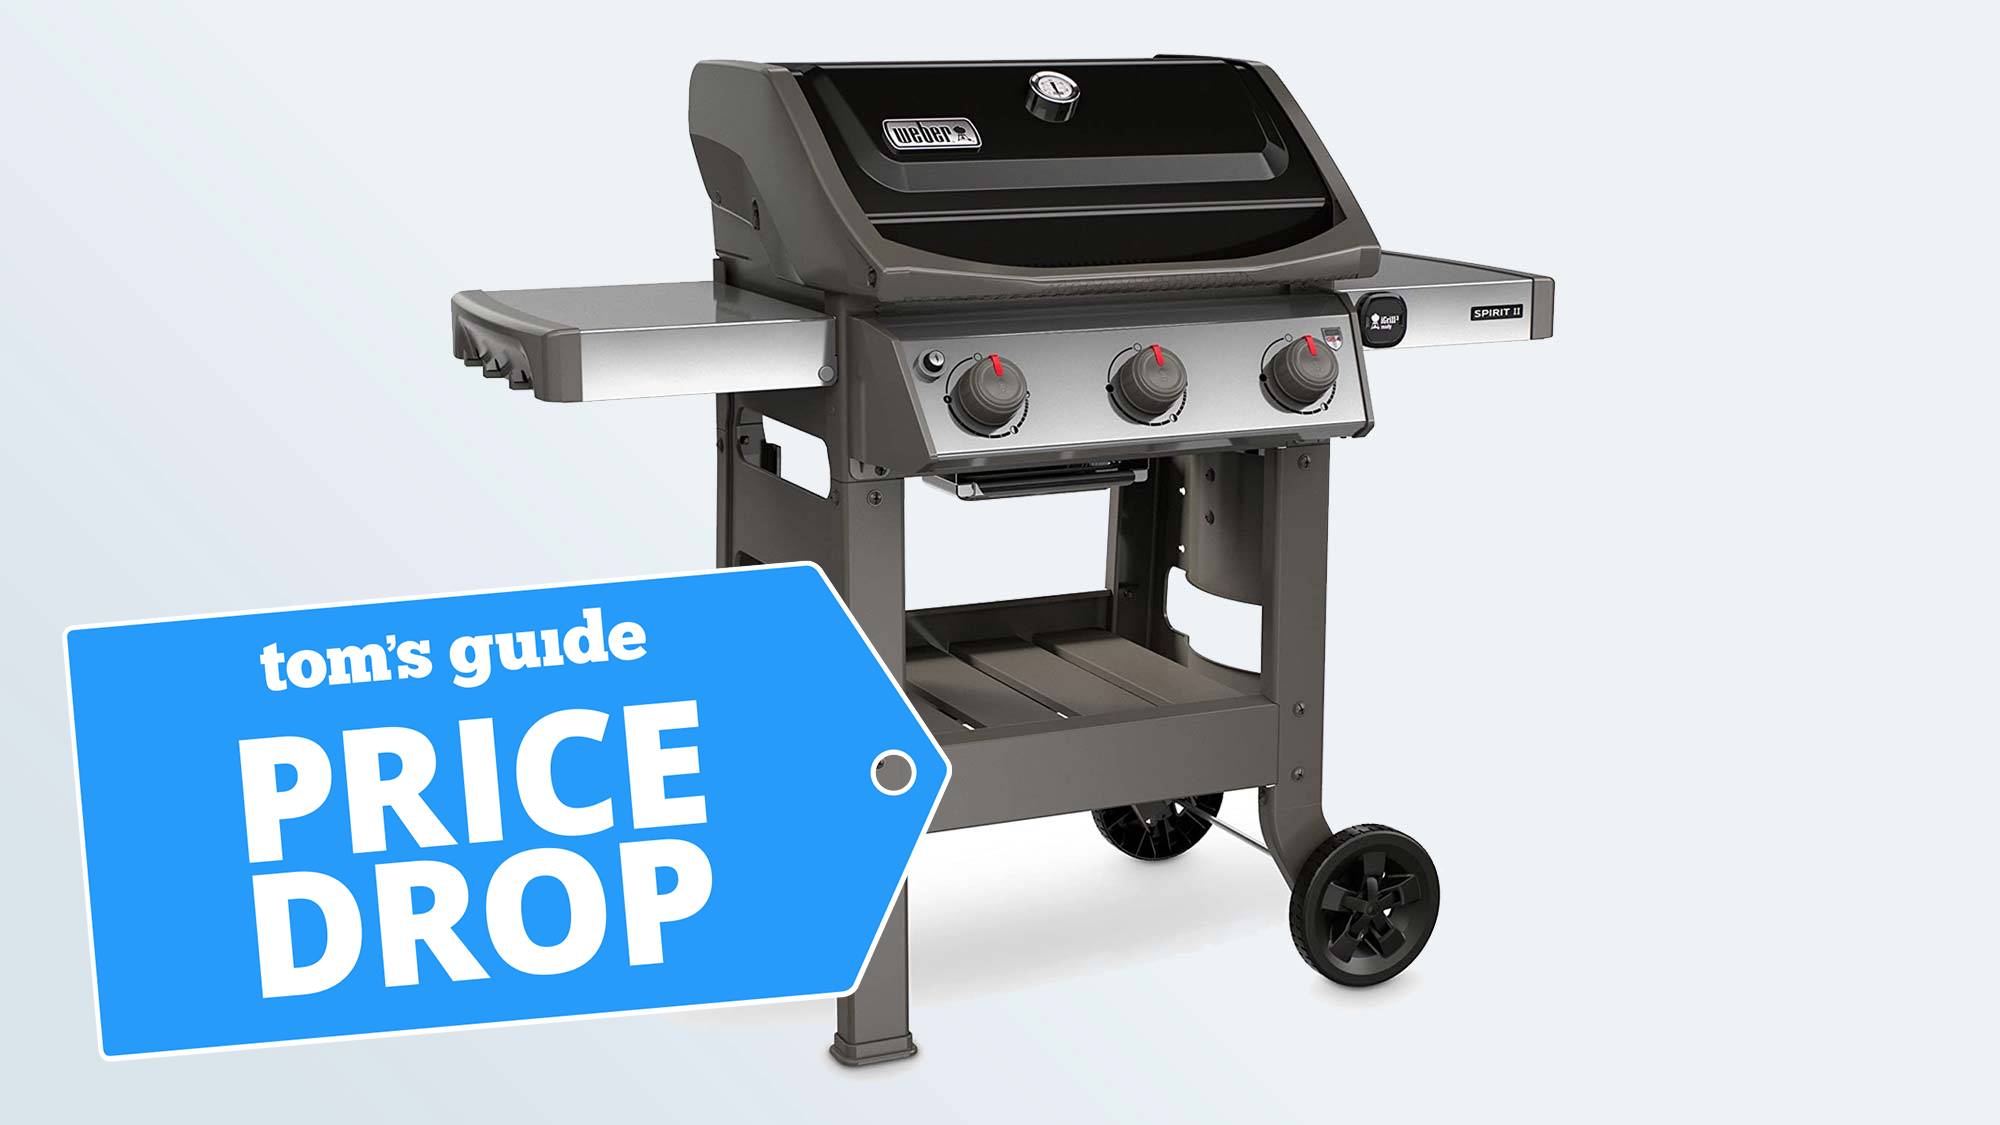 George Foreman indoor/outdoor electric grills are just $55 at